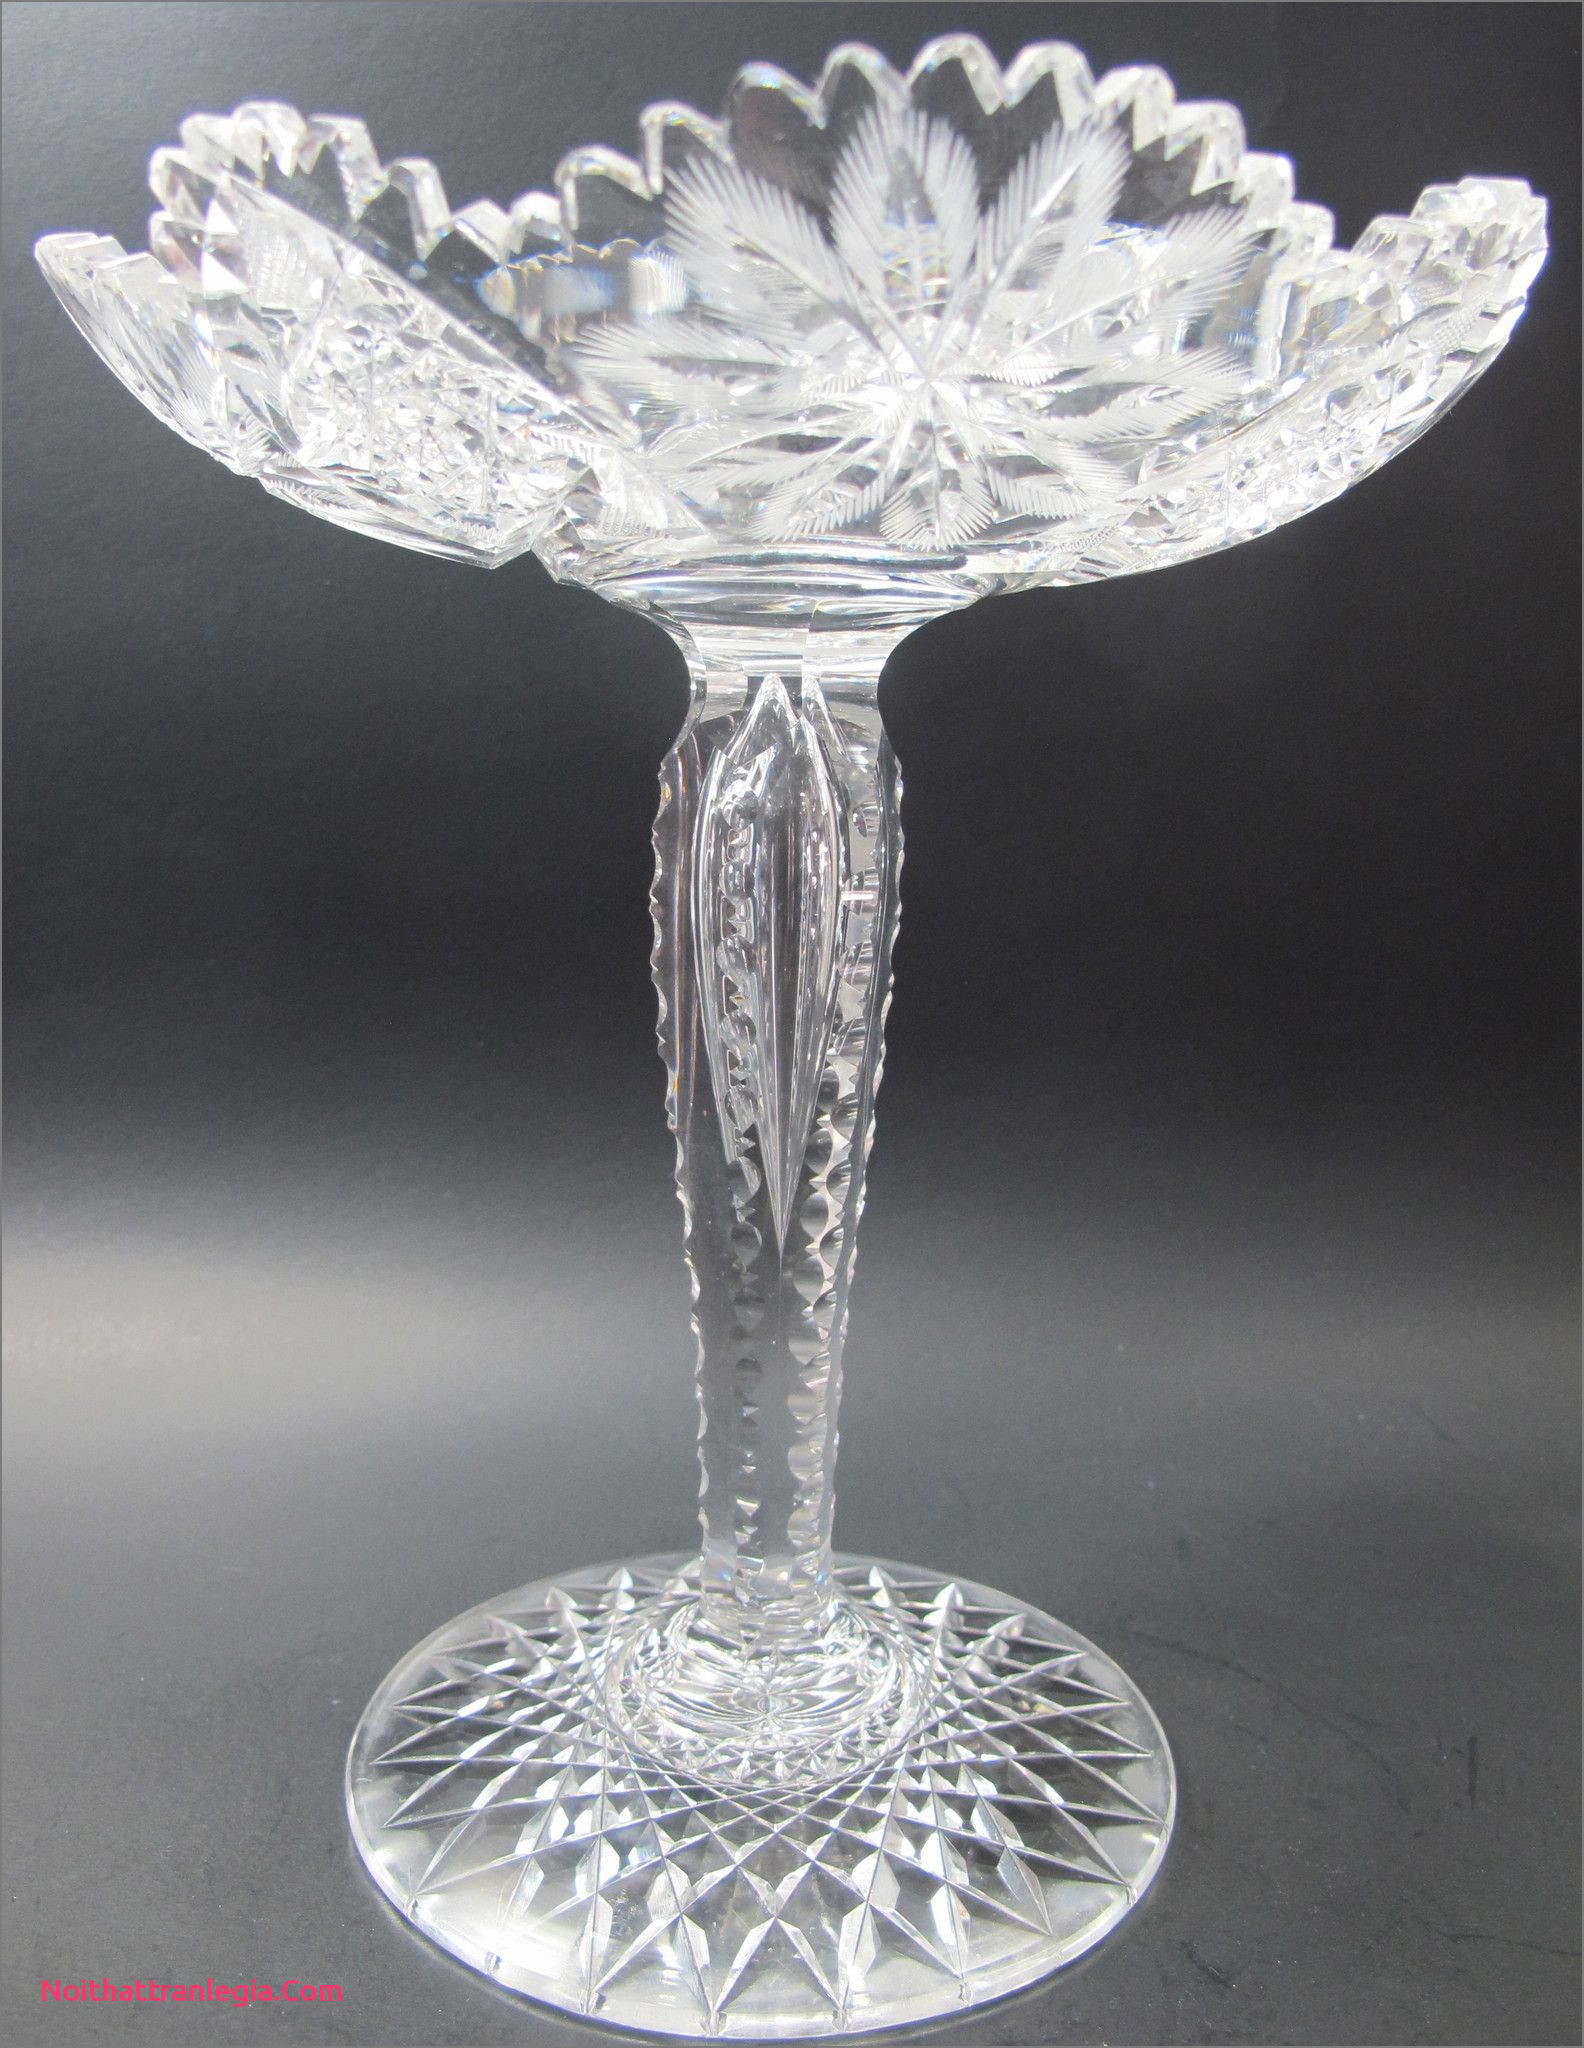 14 Perfect Extra Large Glass Flower Vases 2024 free download extra large glass flower vases of 20 cut glass antique vase noithattranlegia vases design in fering this abp antique cut glass pote from the american brilliant period 1886 1916 9 5